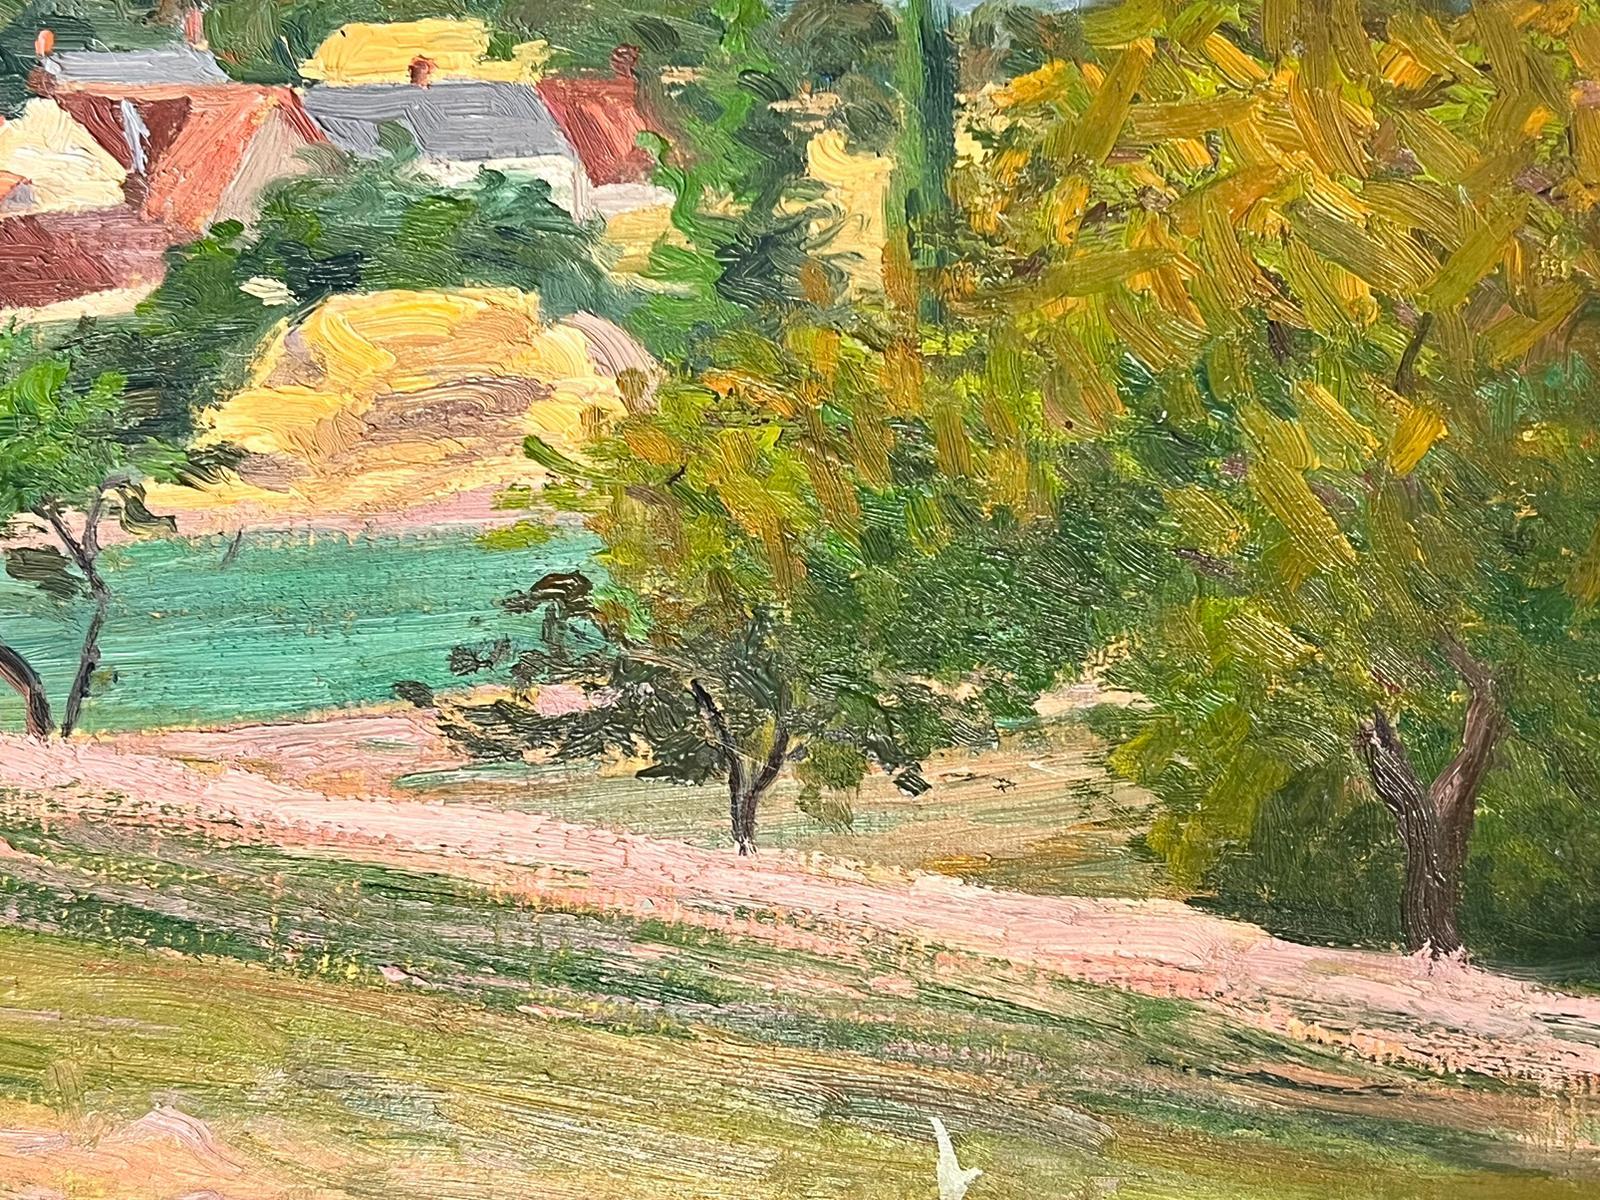 Artist/ School: Suzanne Crochet (French c. 1930) French Impressionist artist

Title: The French Countryside 

Medium: oil on board, unframed 

Size:

board: 8.5 x 13 inches

Provenance: private collection, France

Condition: The painting is in